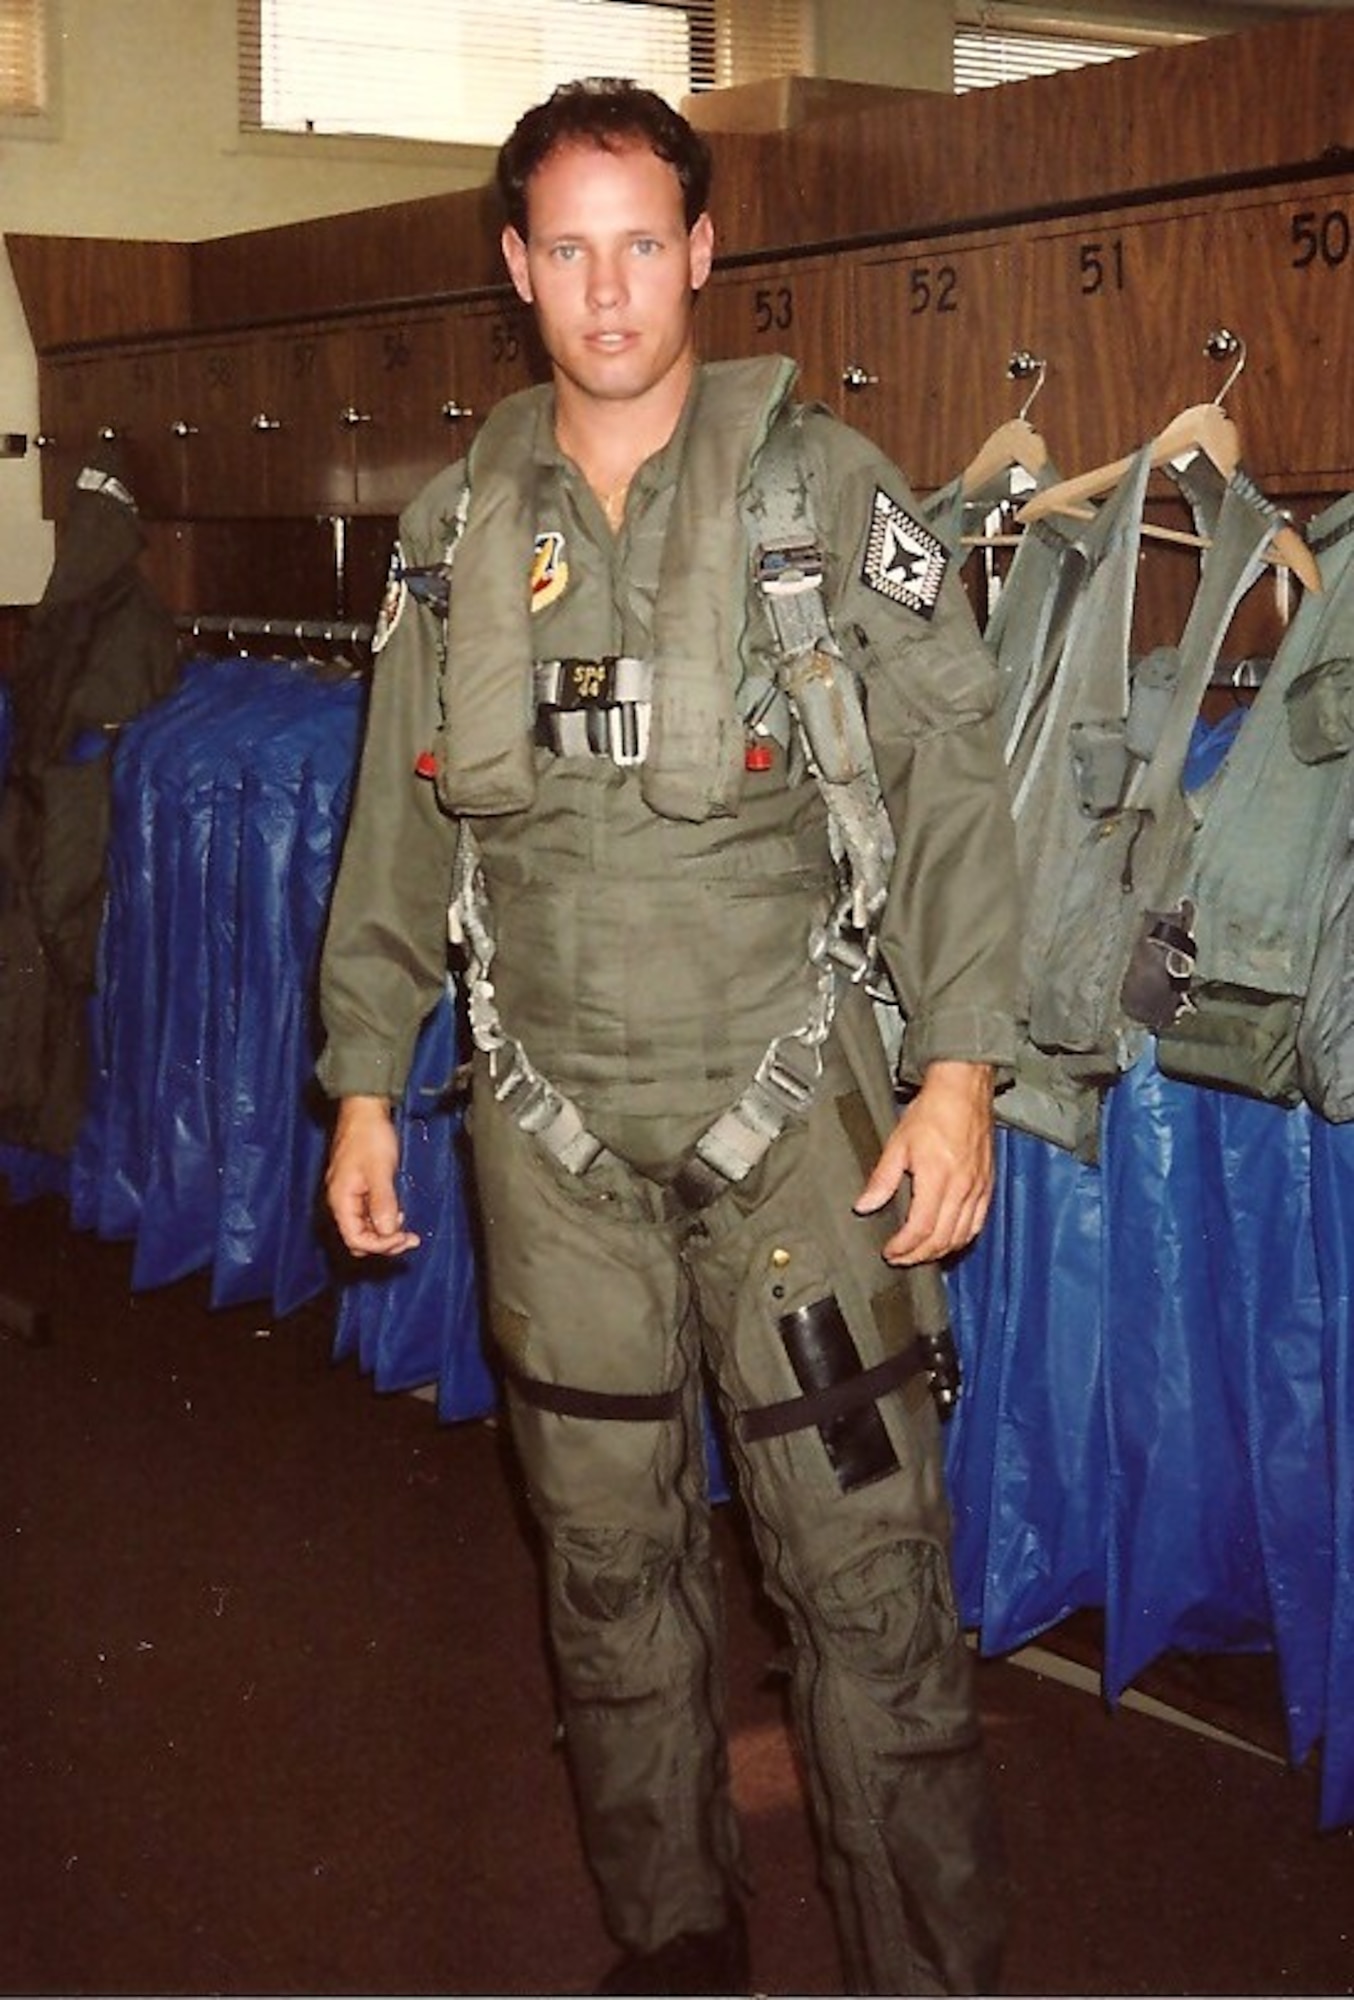 Retired Master Sgt. Derrell White stands proudly in uniform at Homestead Air Force Base during his first Reserve assignment in the late 1980s. Courtesy photo. 